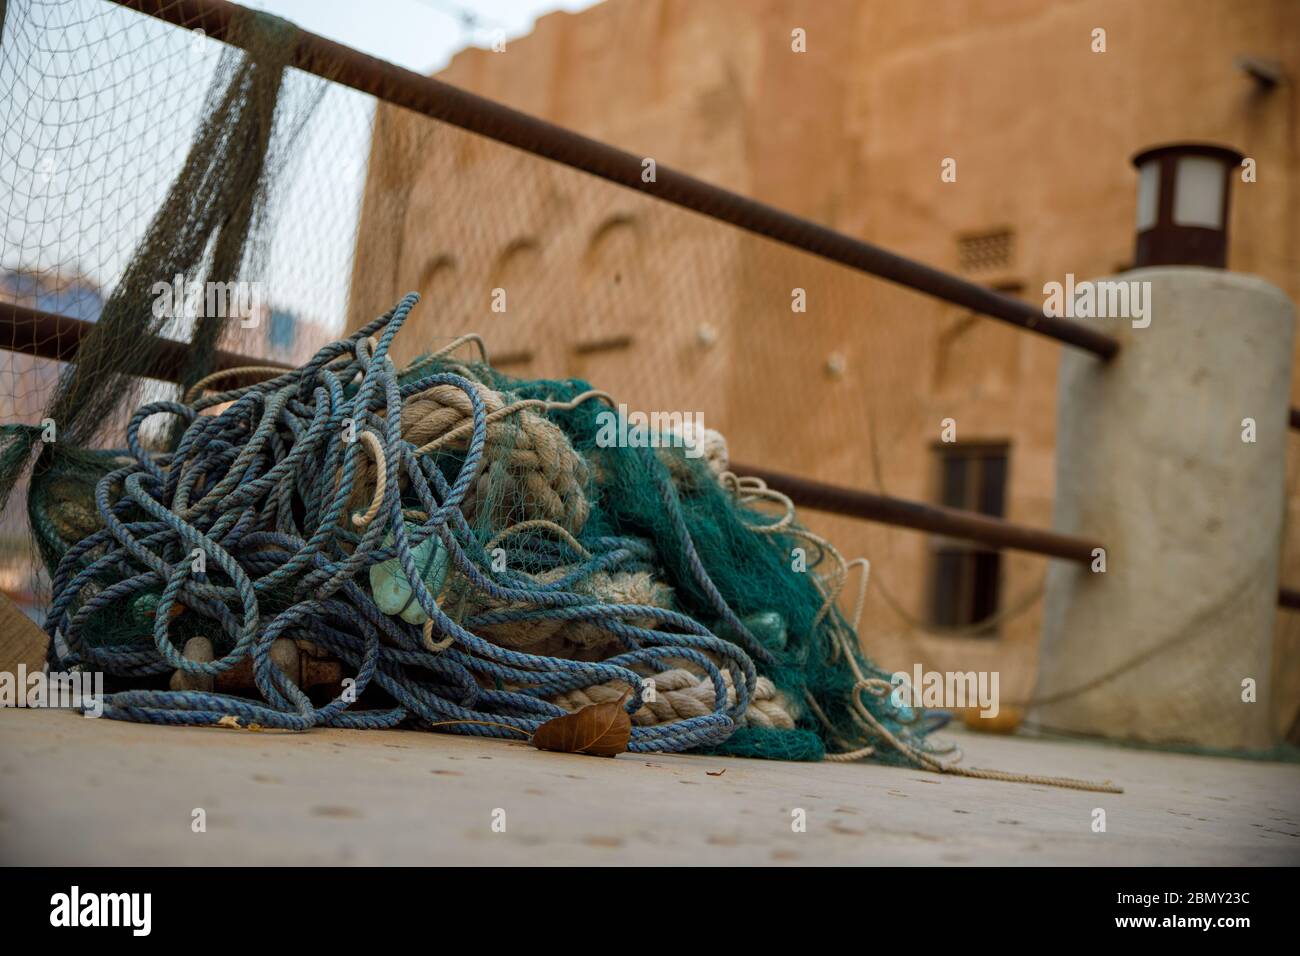 Fishing nets, buoys and floats on pavement not being used in old town Dubai Stock Photo